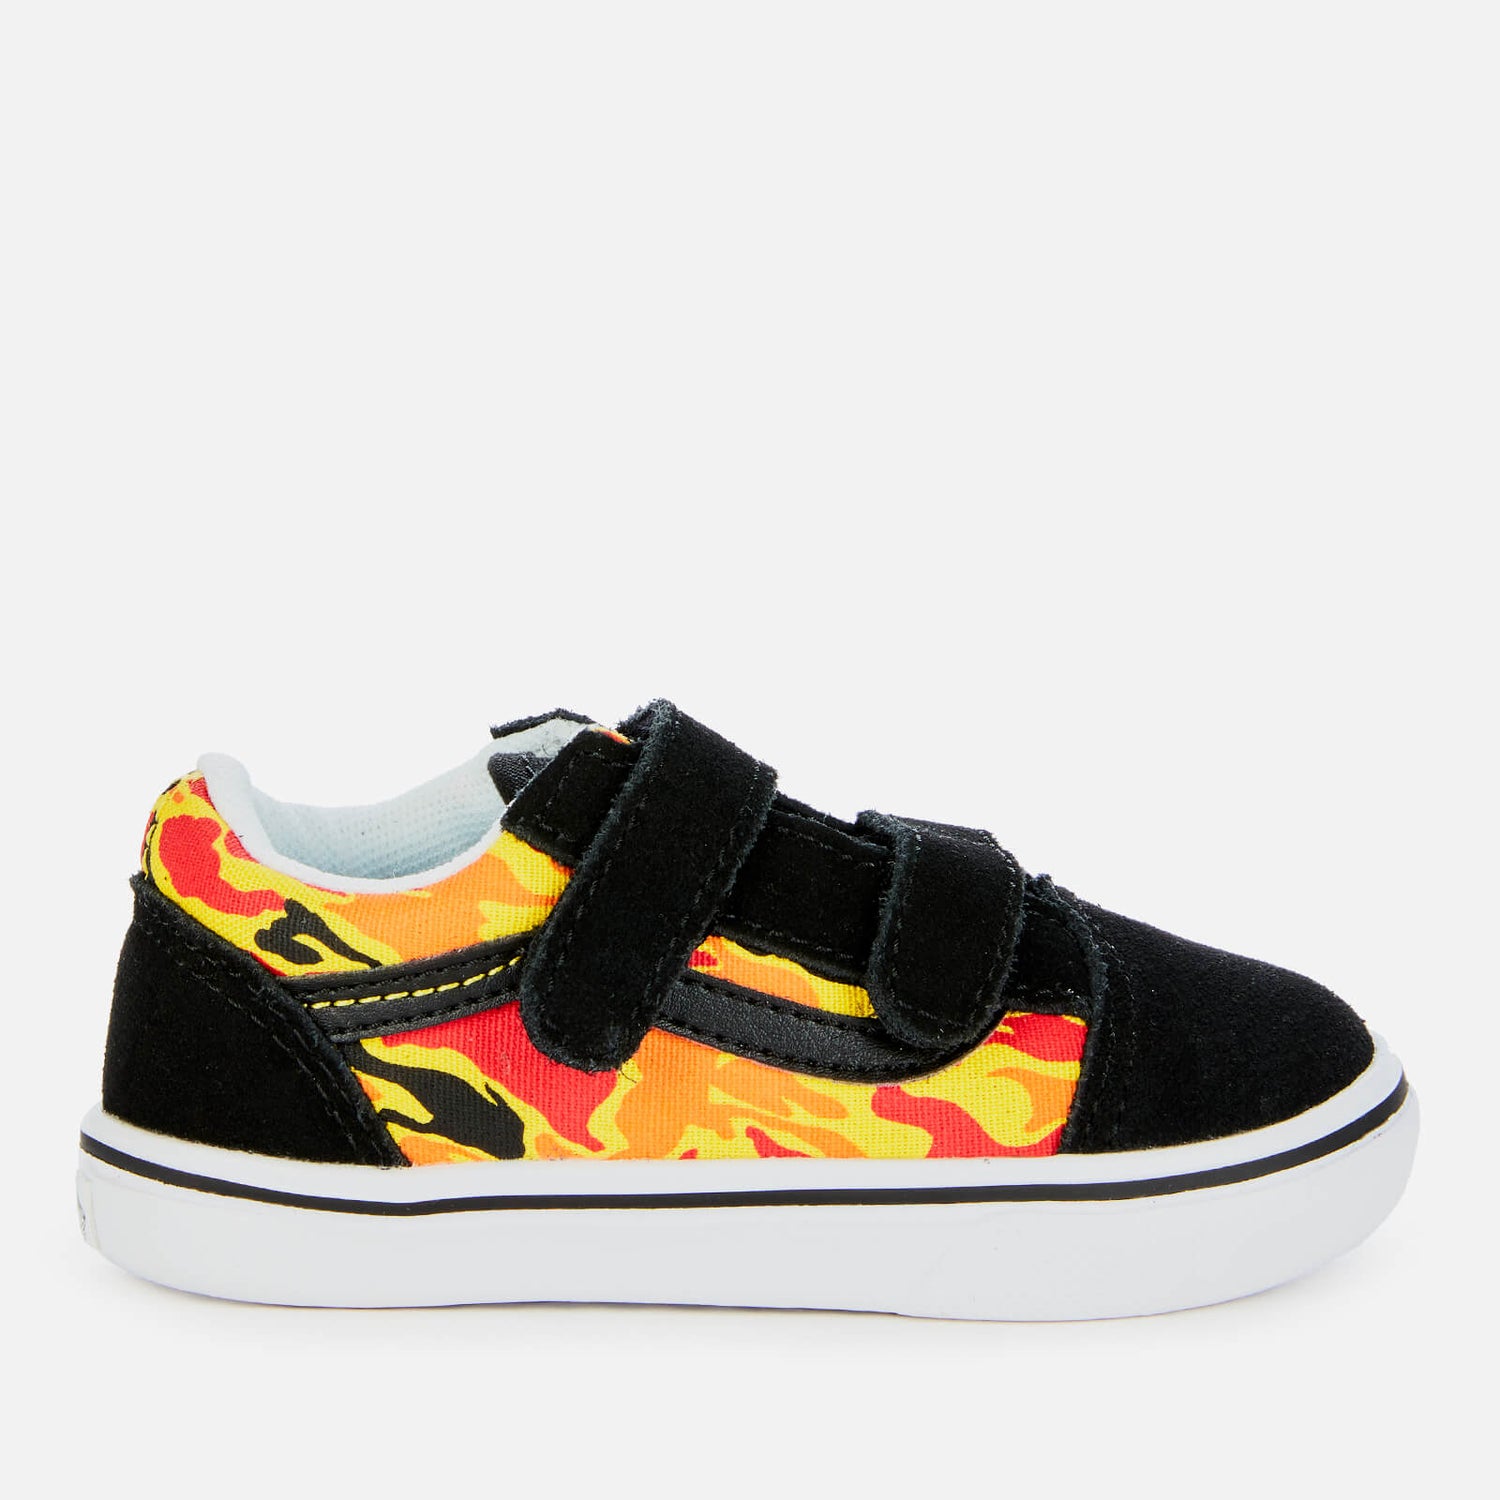 Vans Toddlers' Comfycush Old Skool Velcro Trainers - Flame Camo